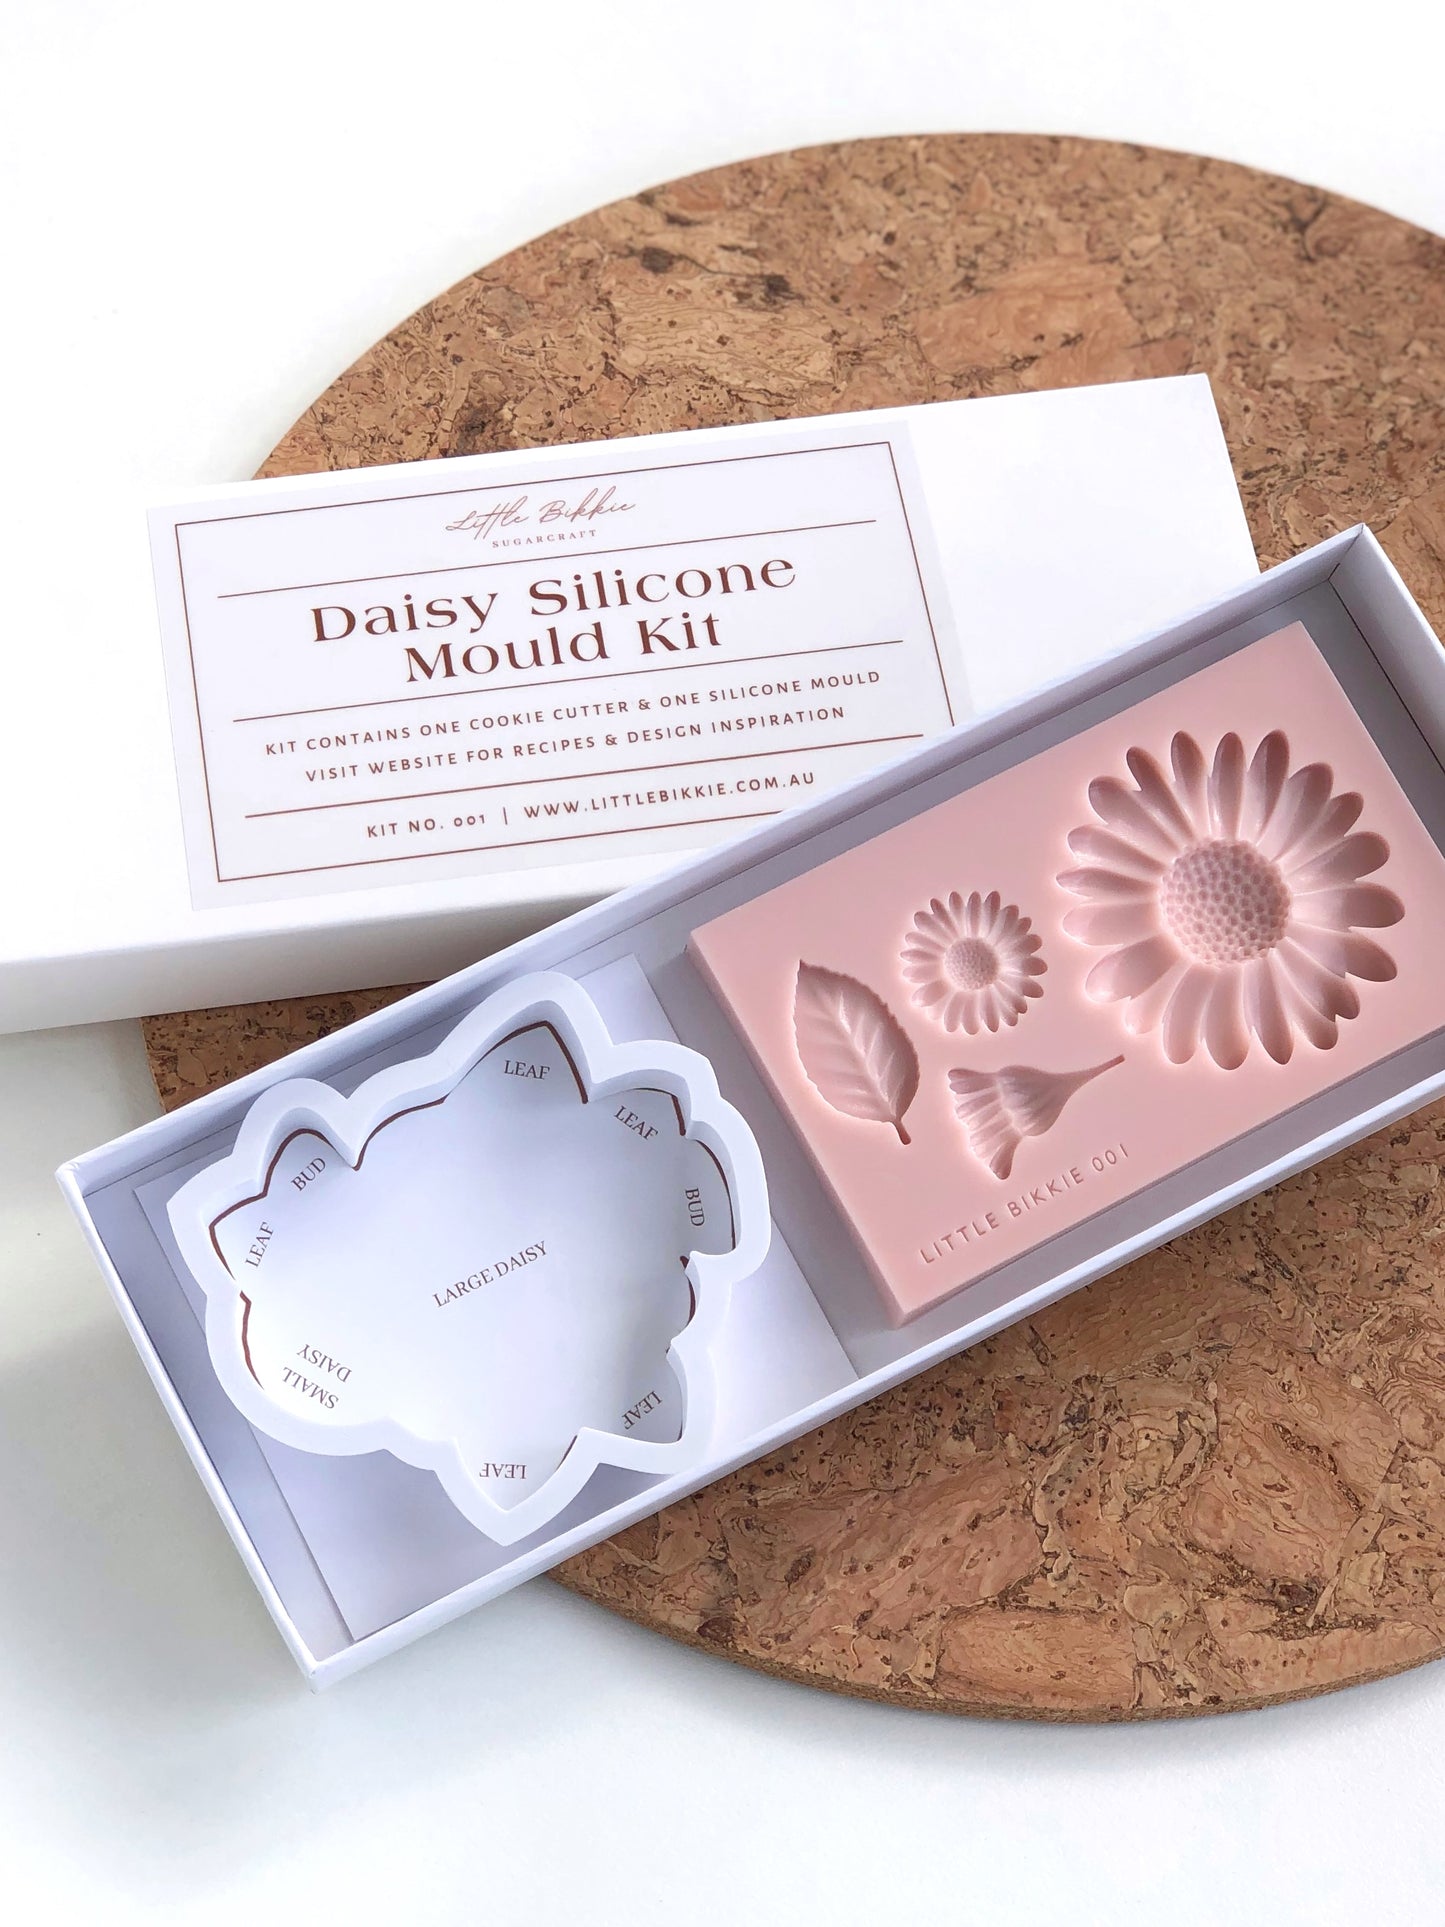 Daisy Silicone Mould Kit